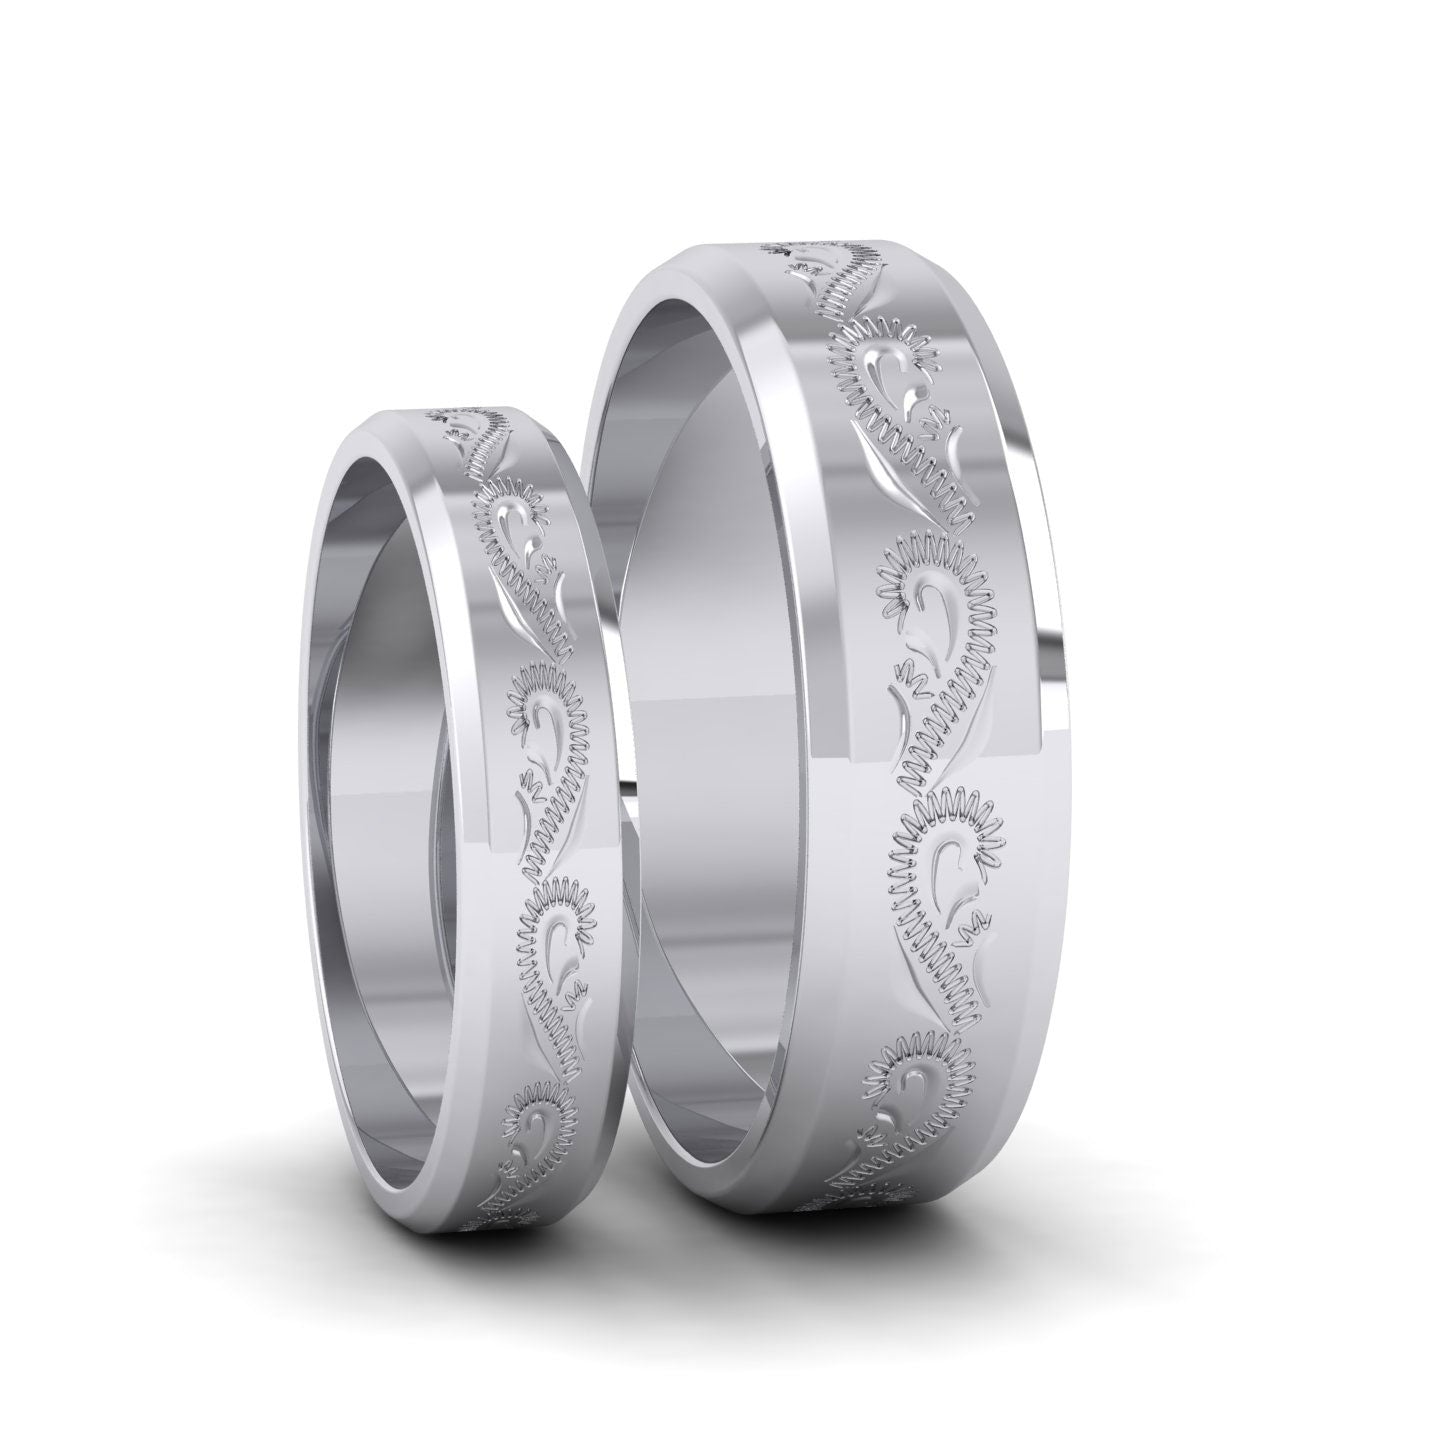 Engraved 9ct White Gold 4mm Flat Wedding Ring With Bevelled Edge